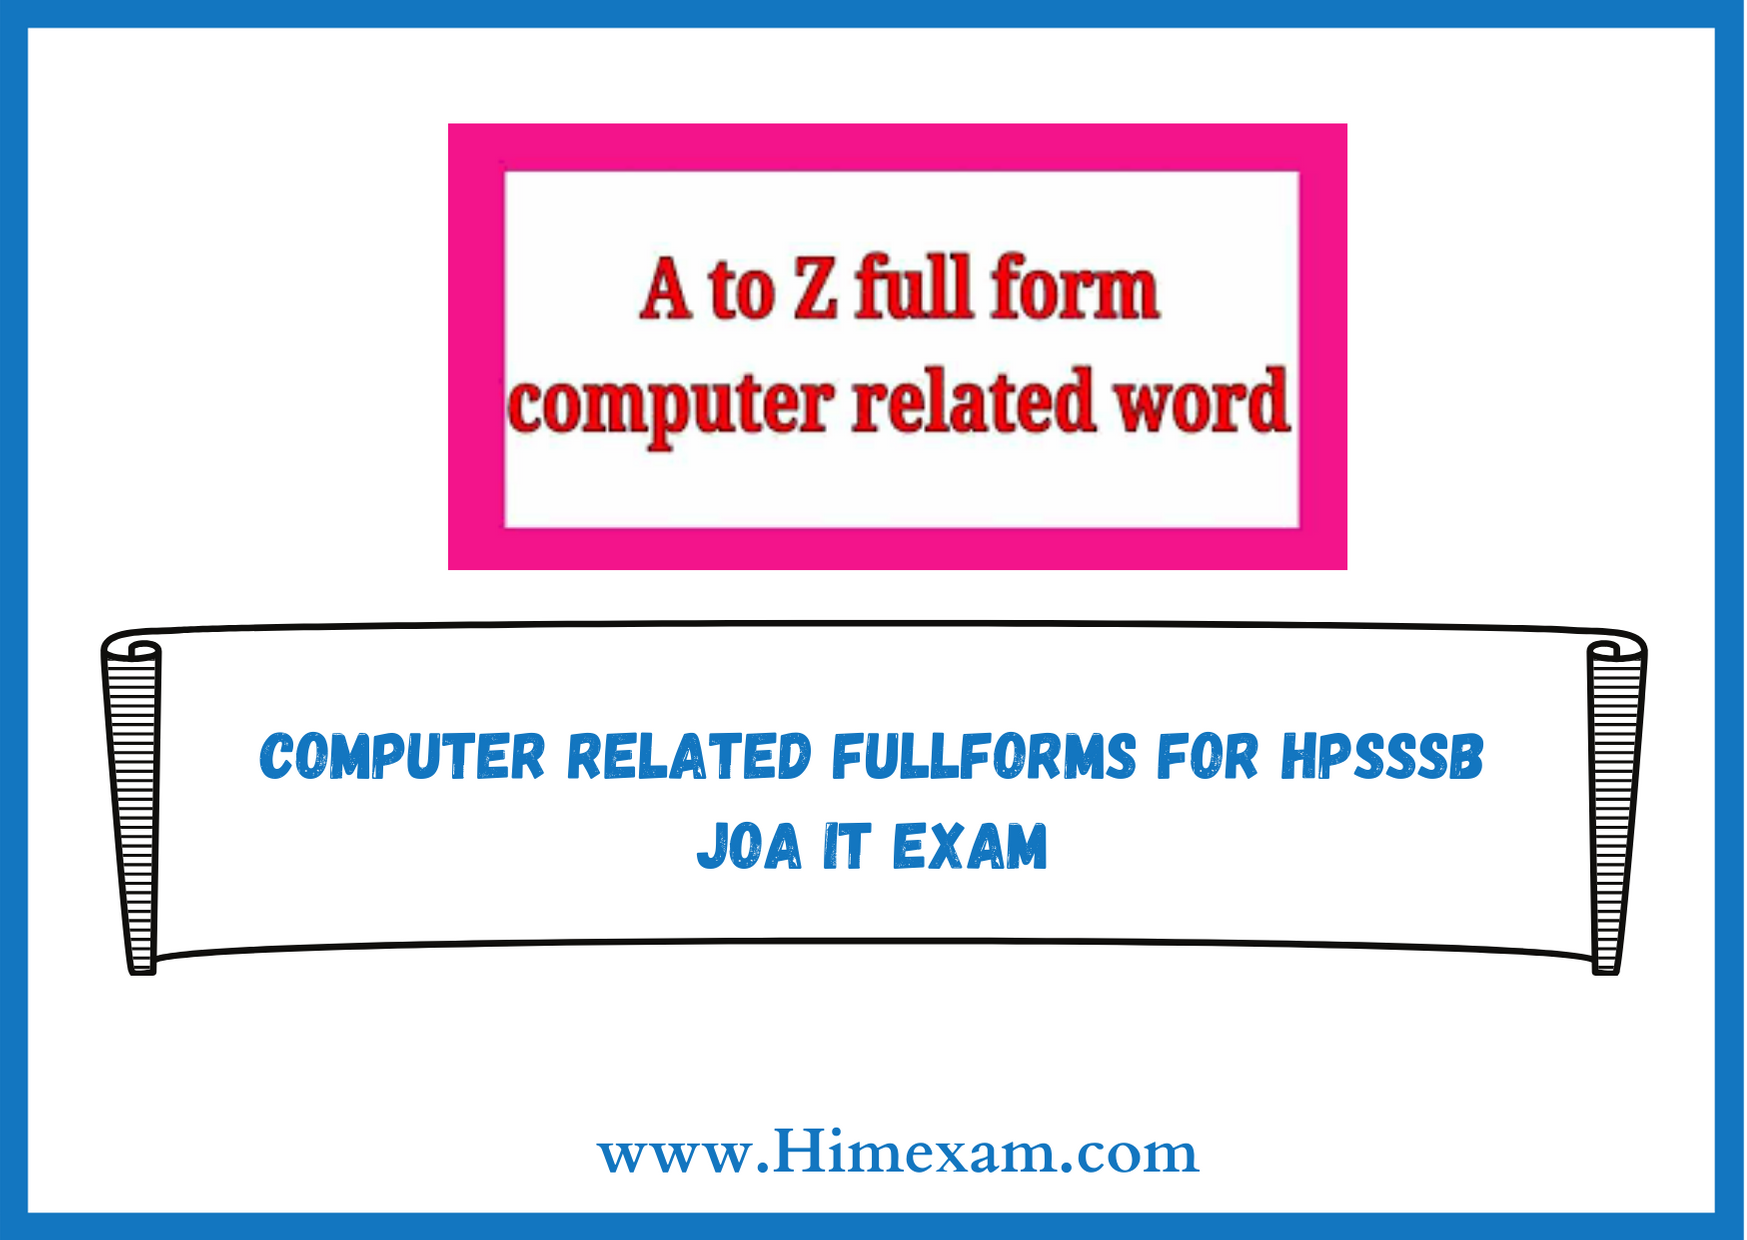 Computer Related FullForms For HPSSSB JOA IT (Post Code -903) Exam